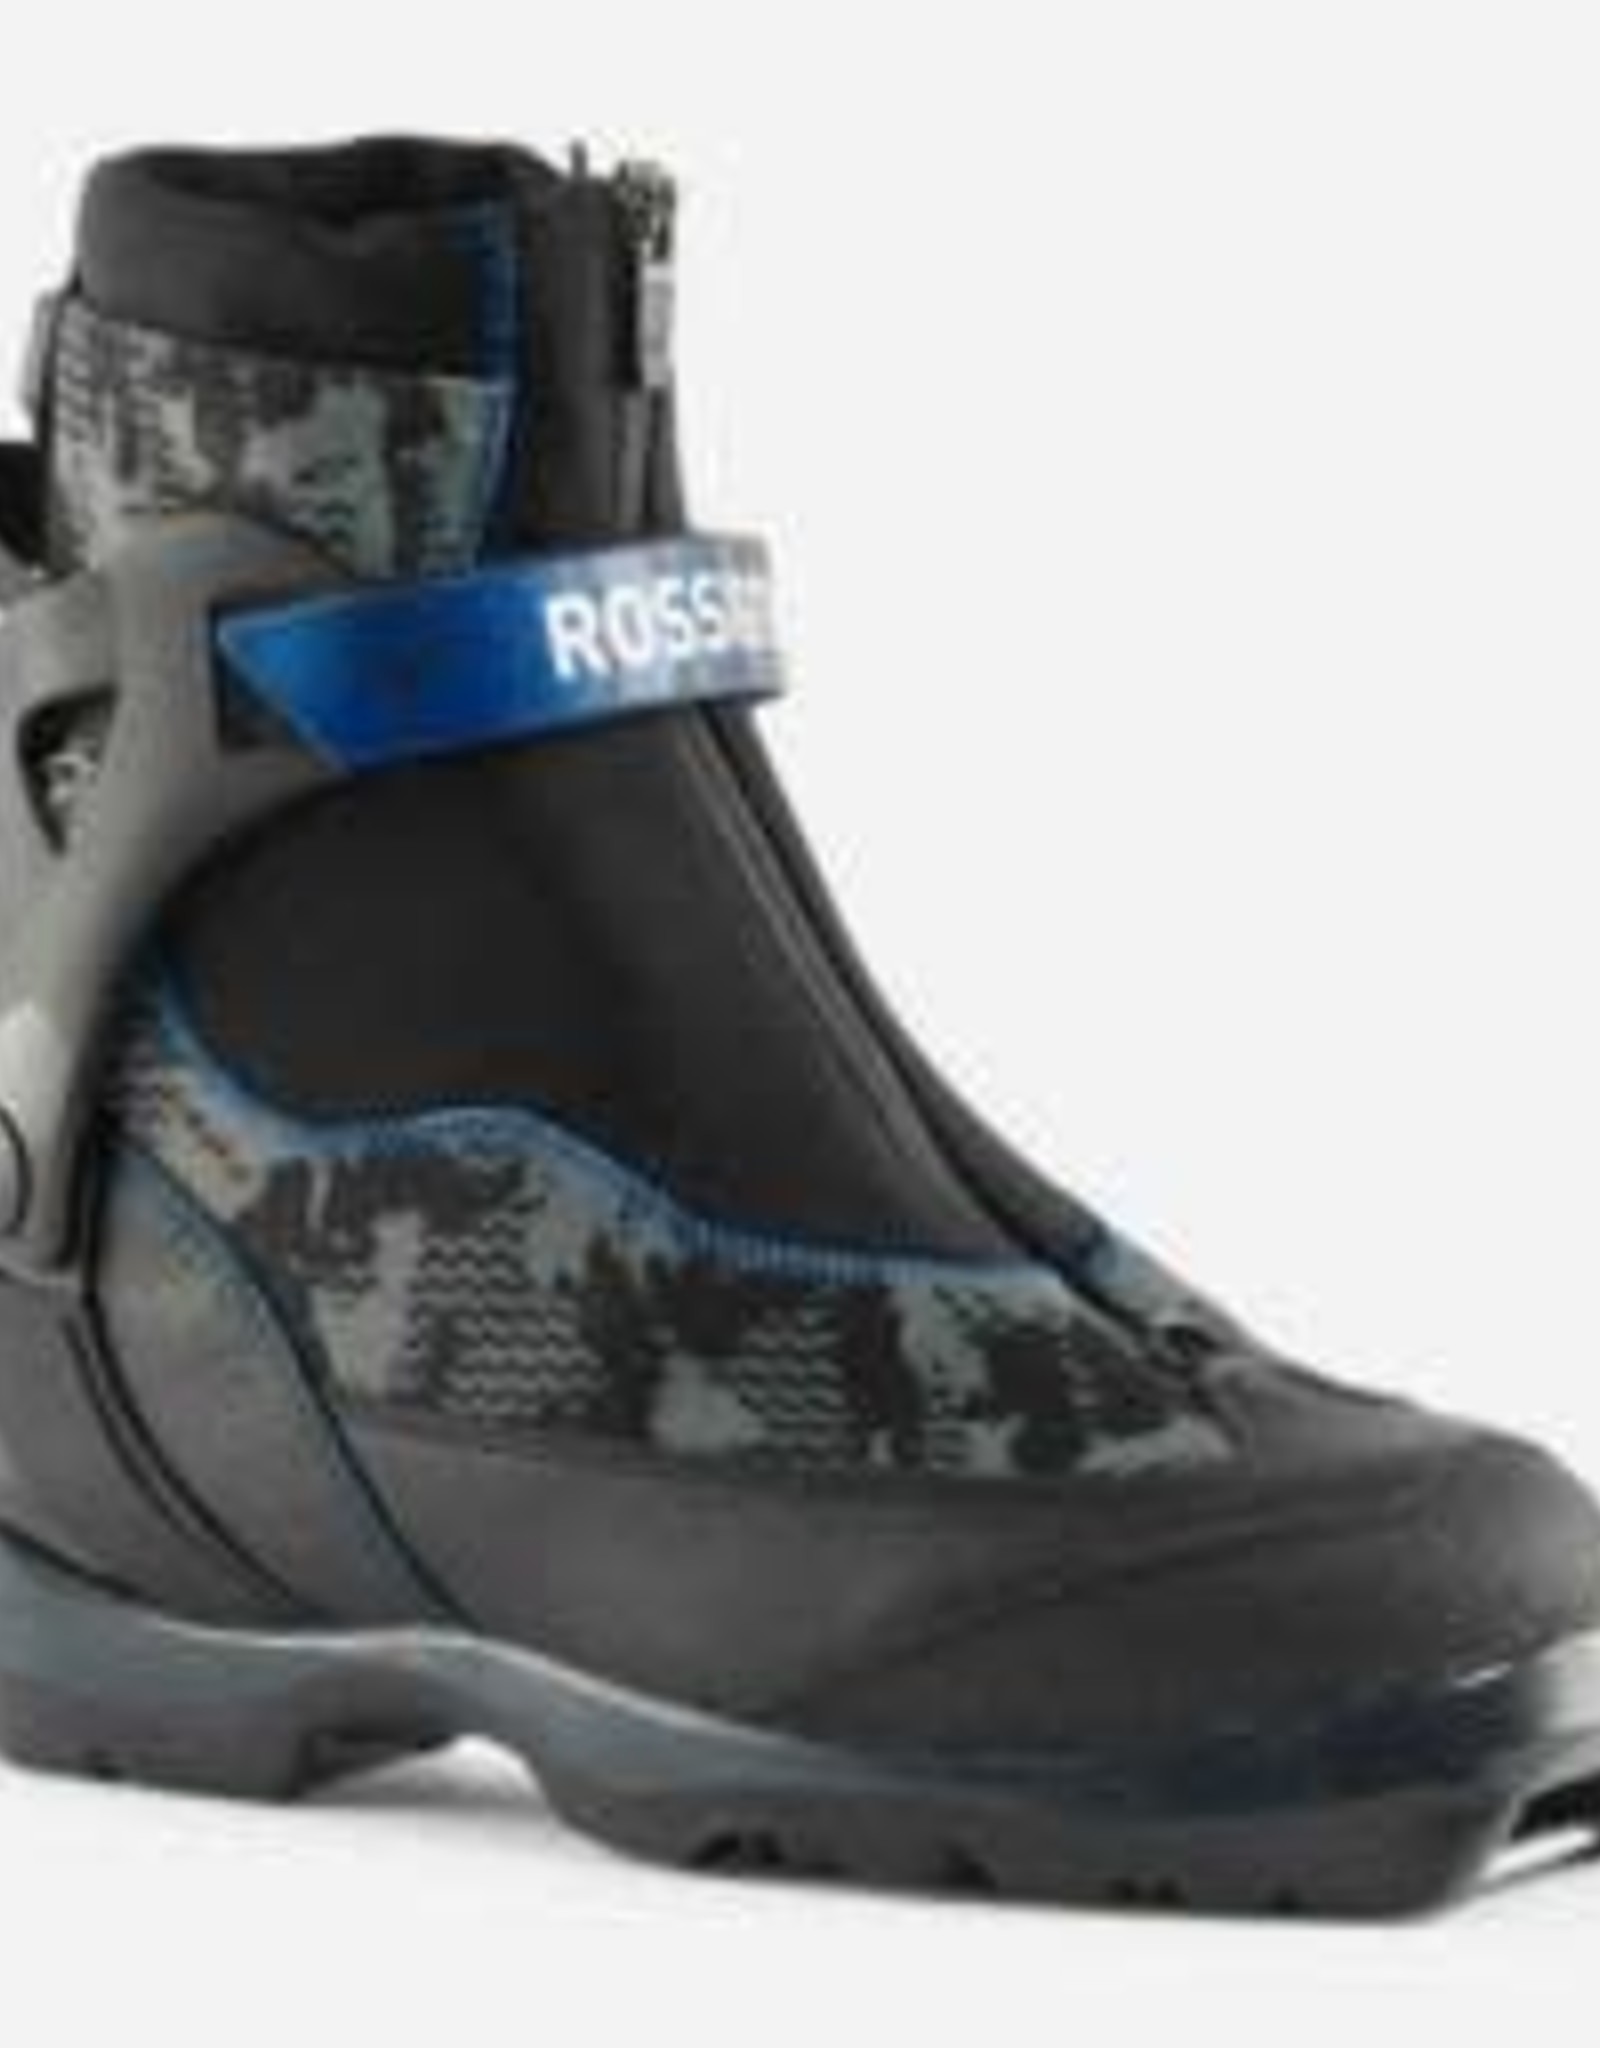 Rossignol BC 6 FW (Back Country)